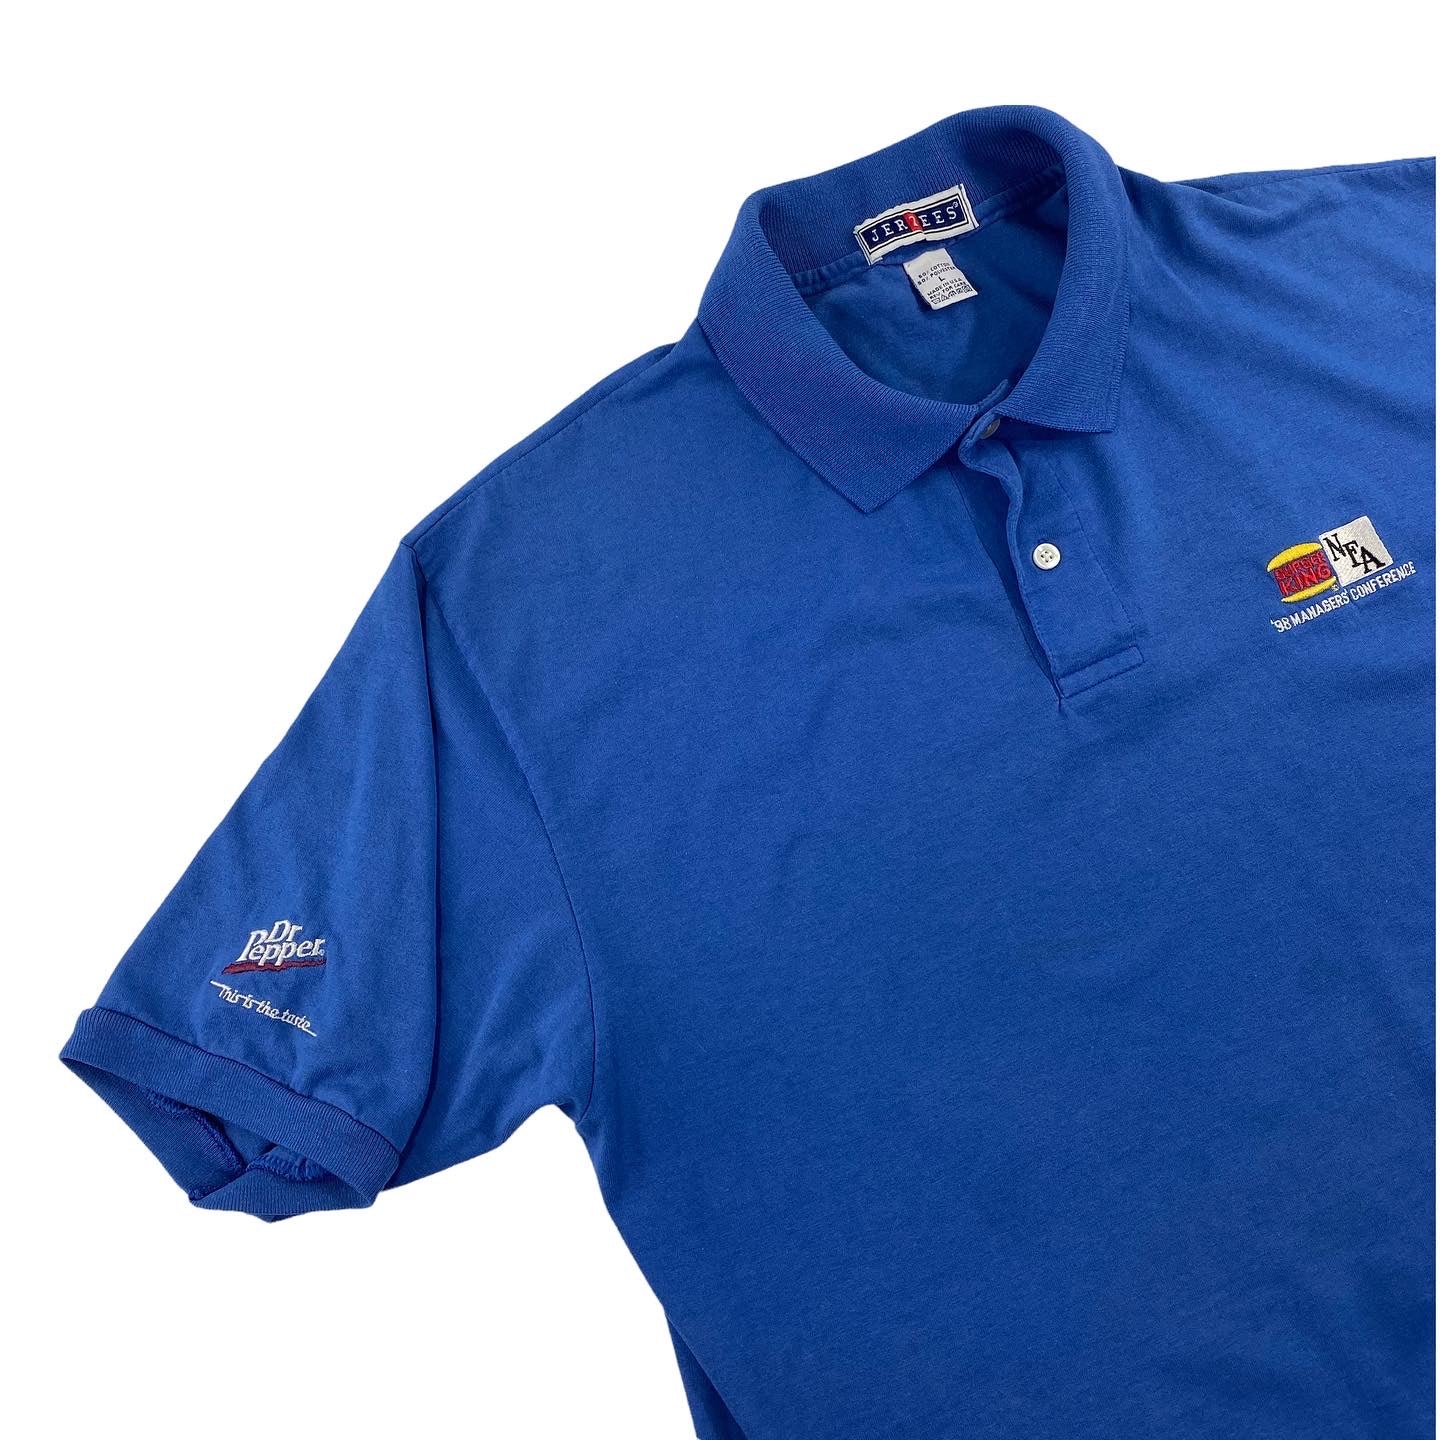 1998 Burger king managers conference polo. large